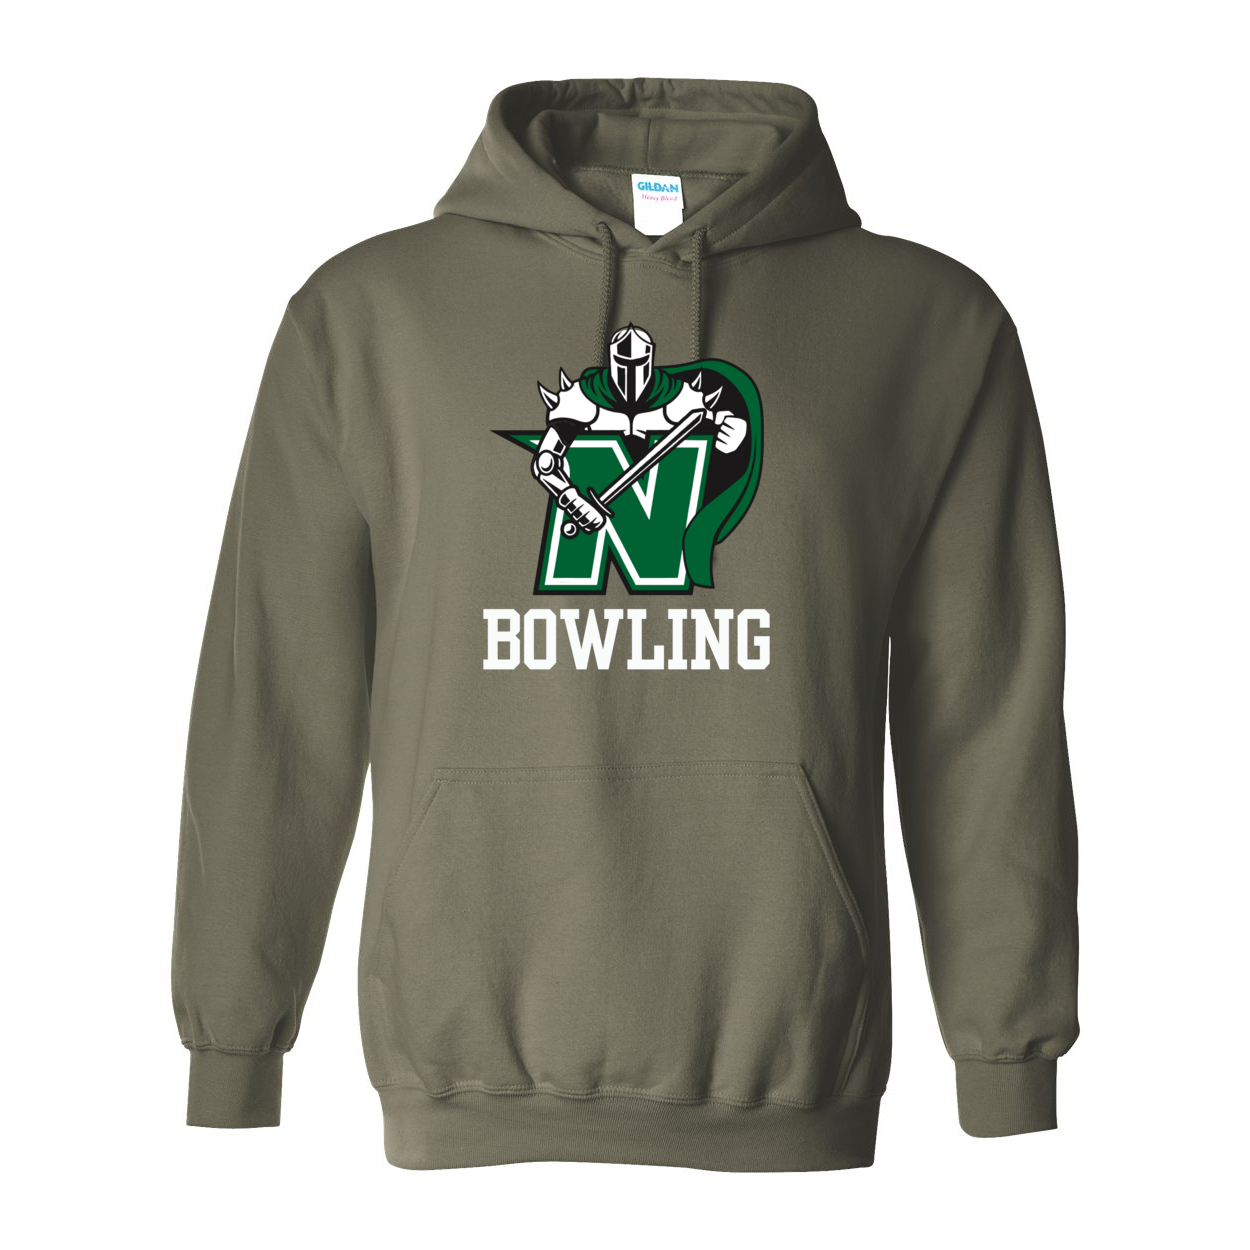 Adult Unisex Classic Logo Bowling Graphic Hoodie - Nordonia Knights